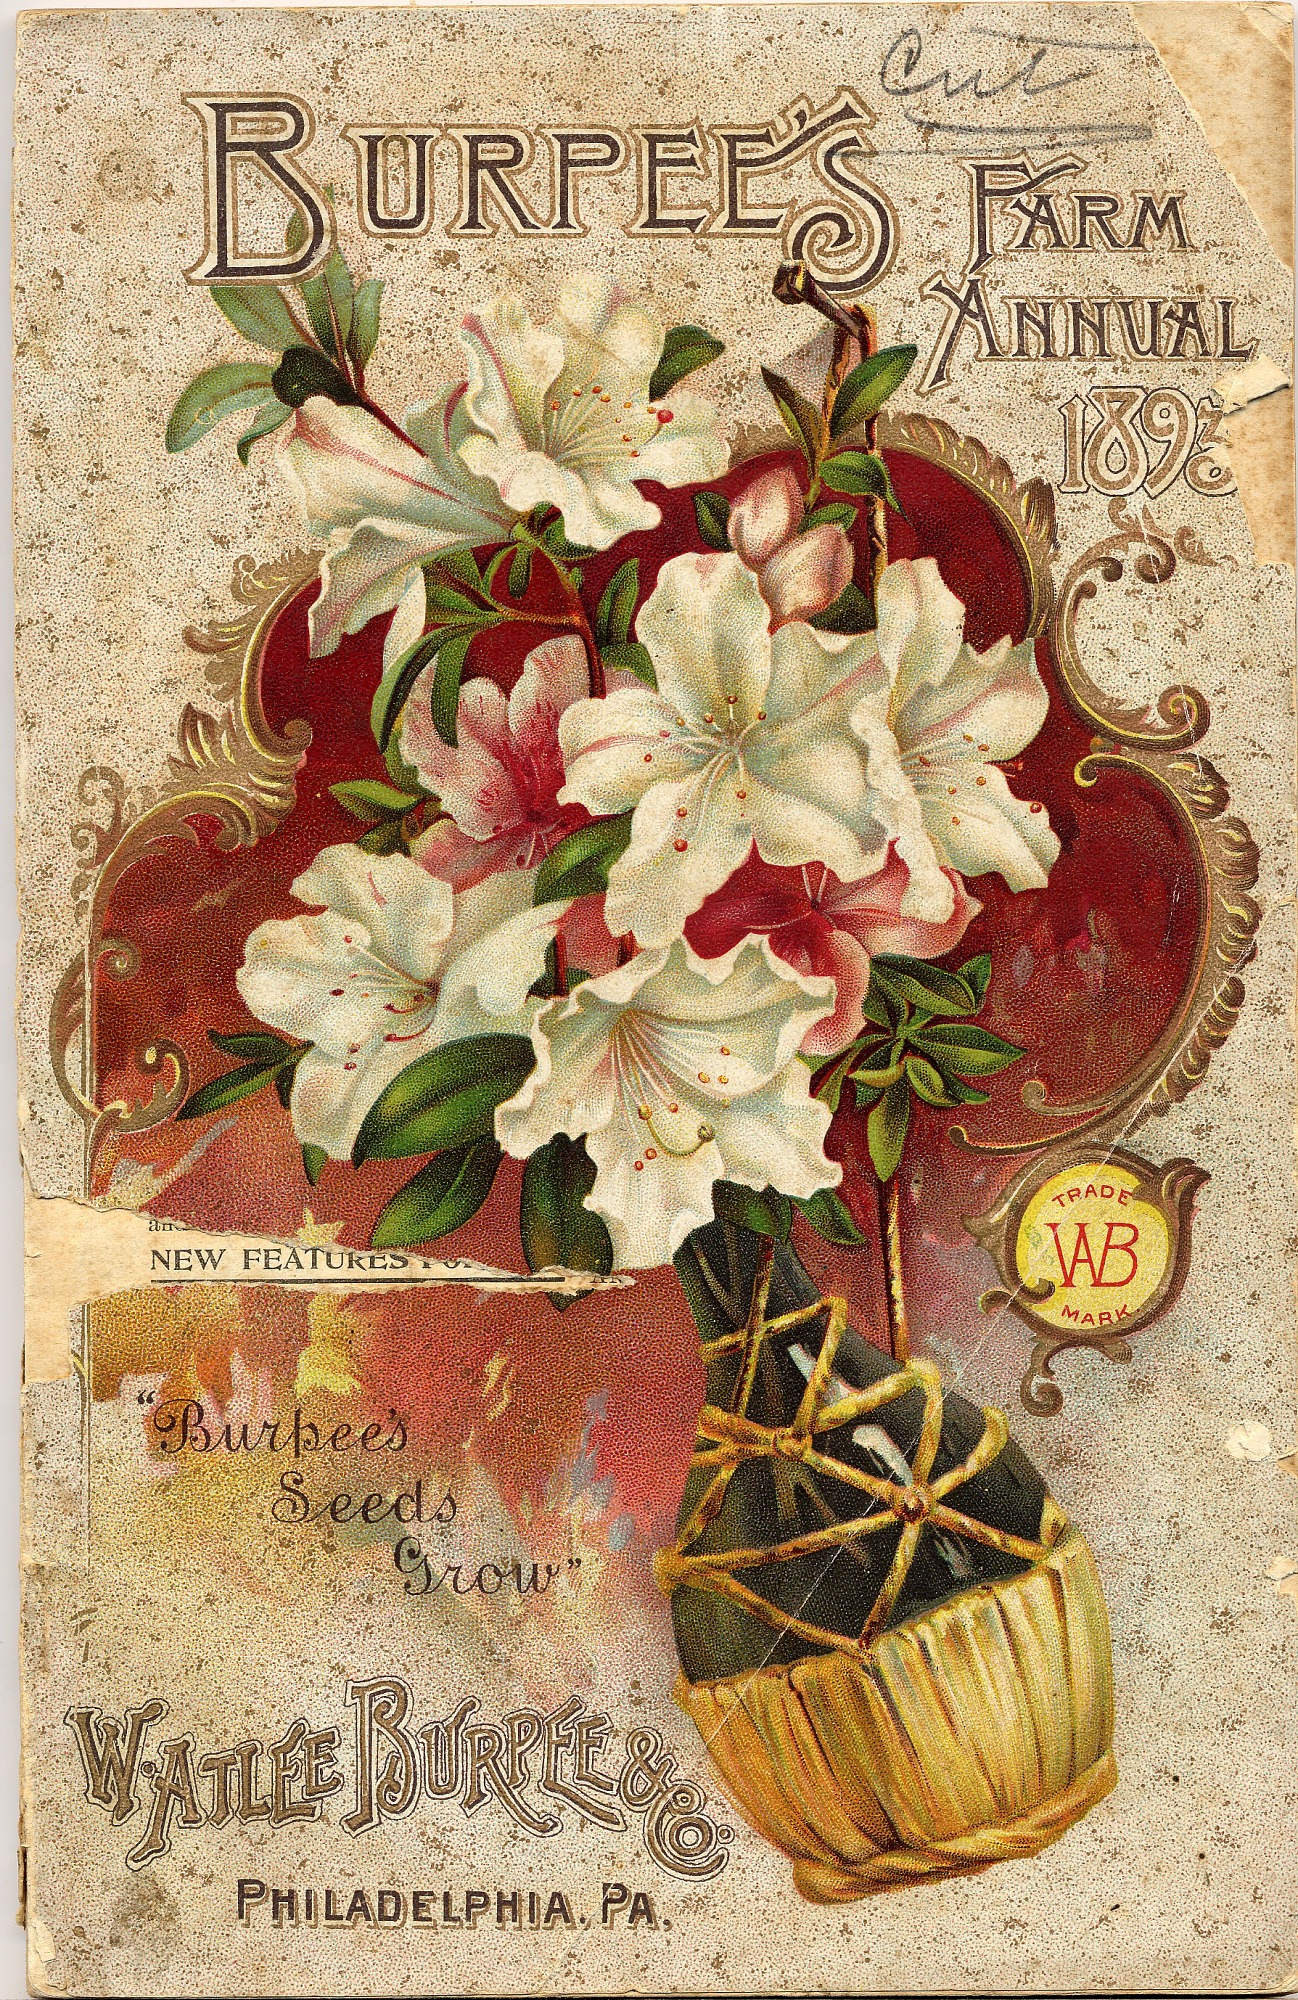 seed catalog image with flowers